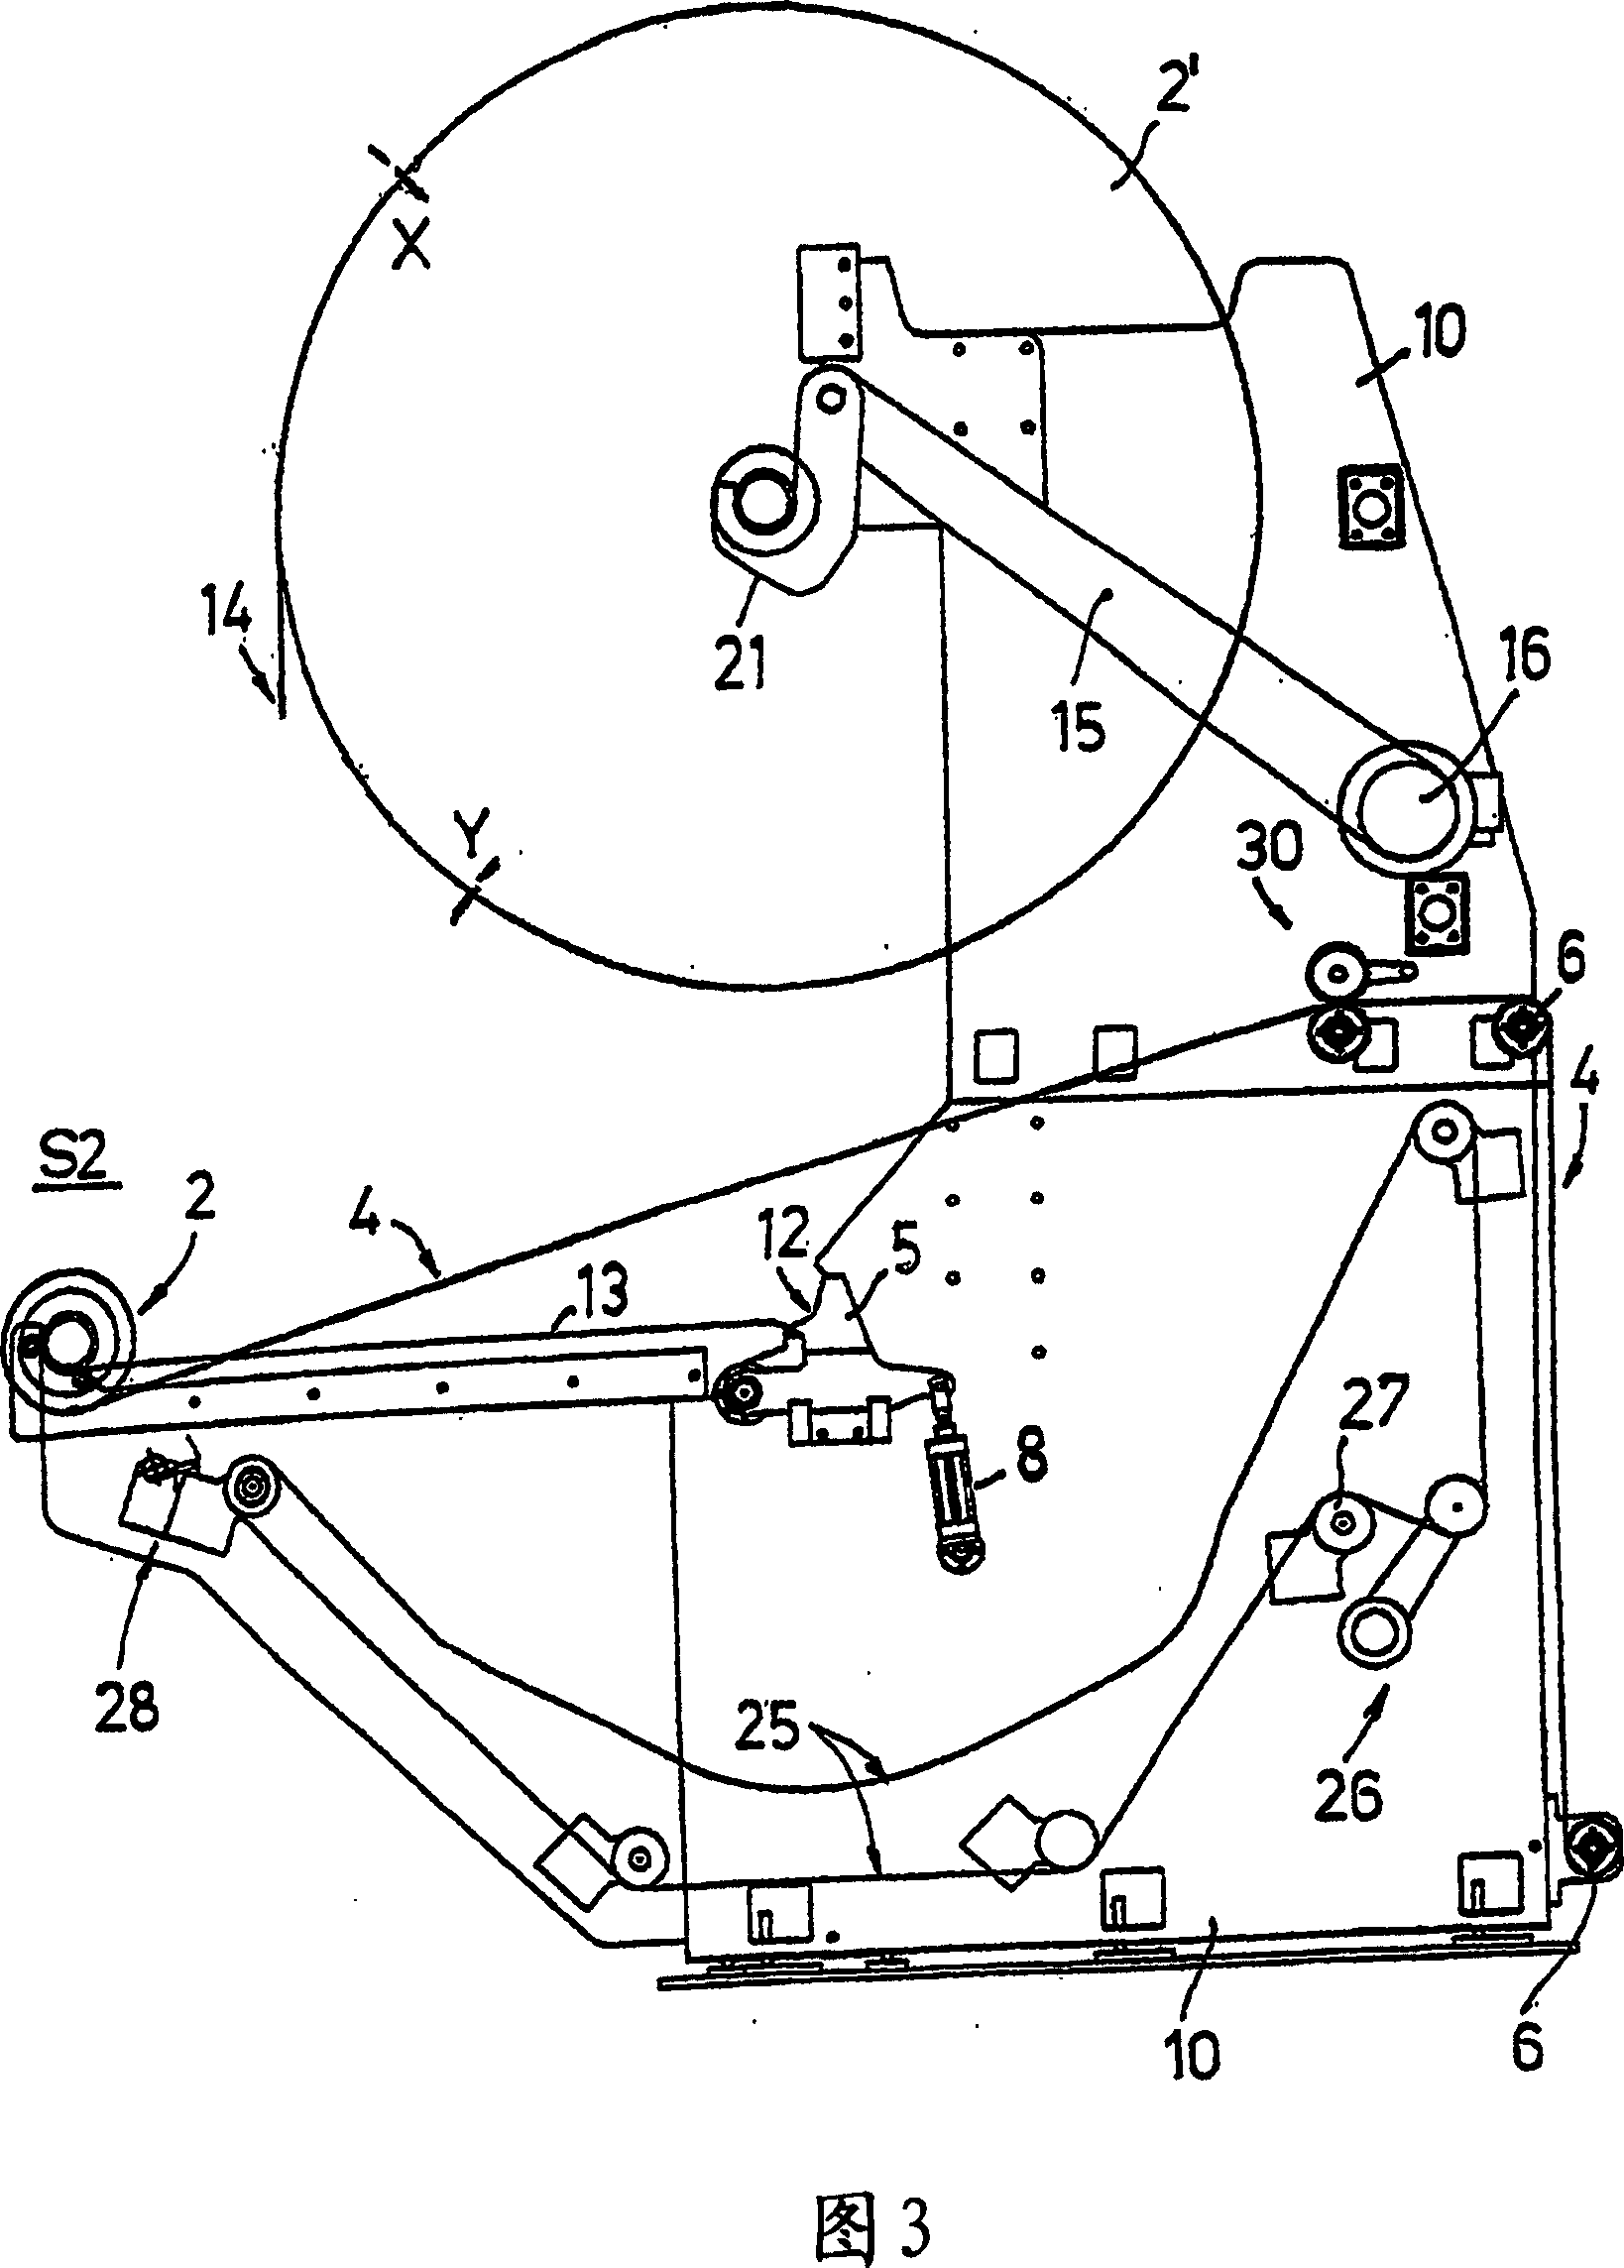 Device and method for changing the reel in an unwinder